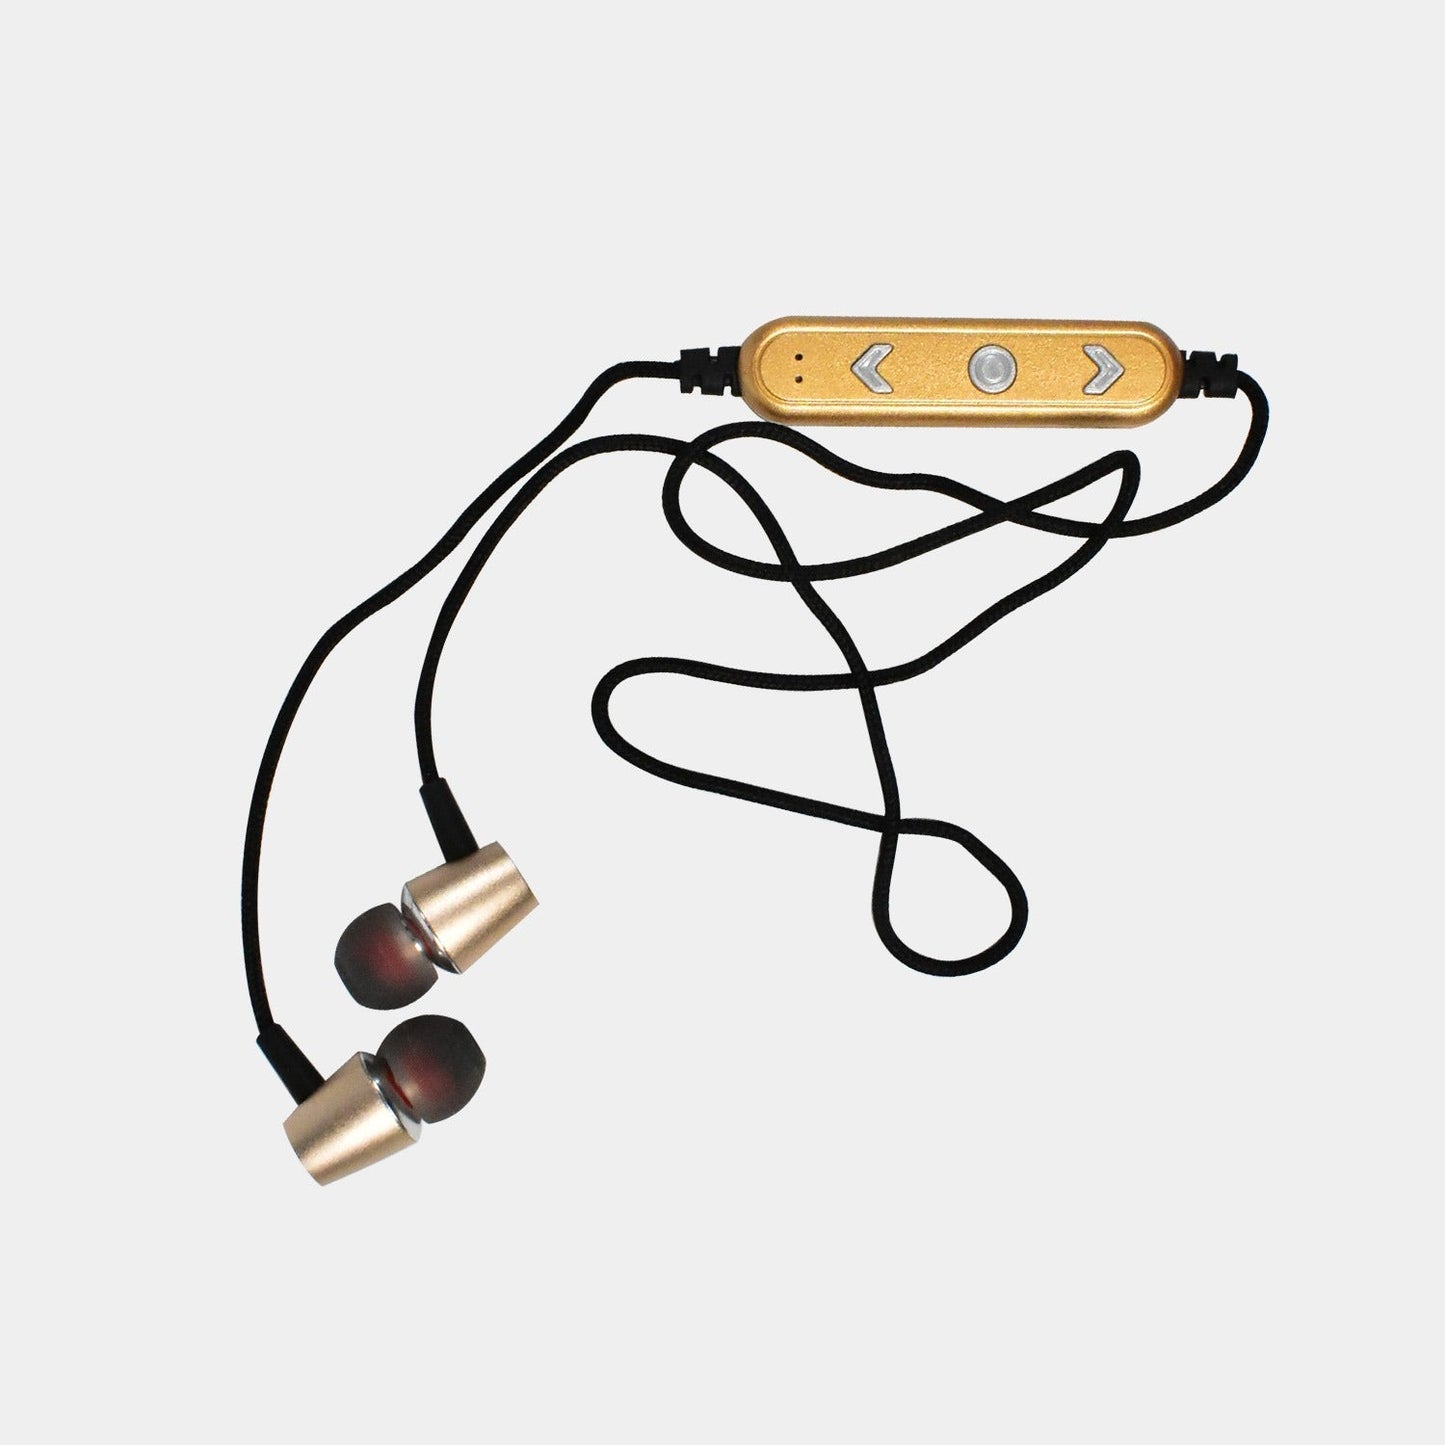 6395 WIRED EARPHONE WITH MIC FASHION, HEADPHONE COMPATIBLE FOR ALL MOBILE PHONES TABLETS LAPTOPS COMPUTERS ( 1pc ) 